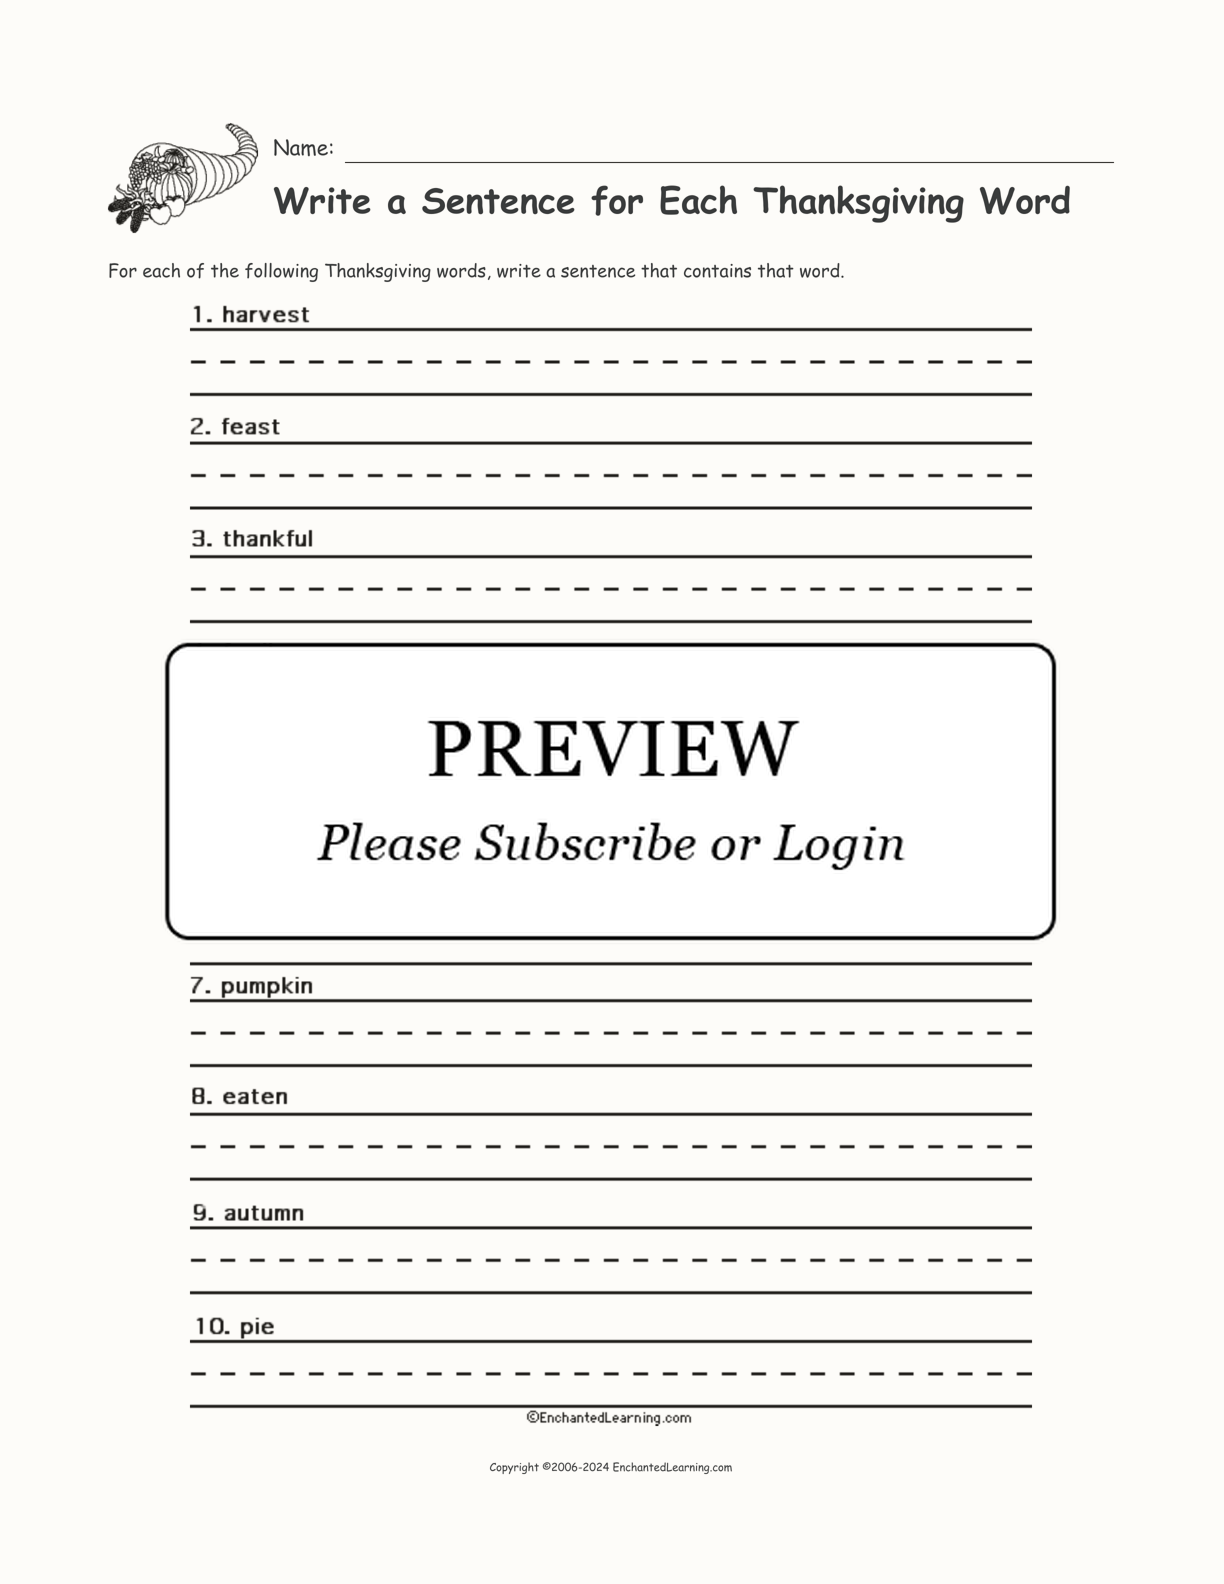 write-a-sentence-for-each-thanksgiving-word-enchanted-learning